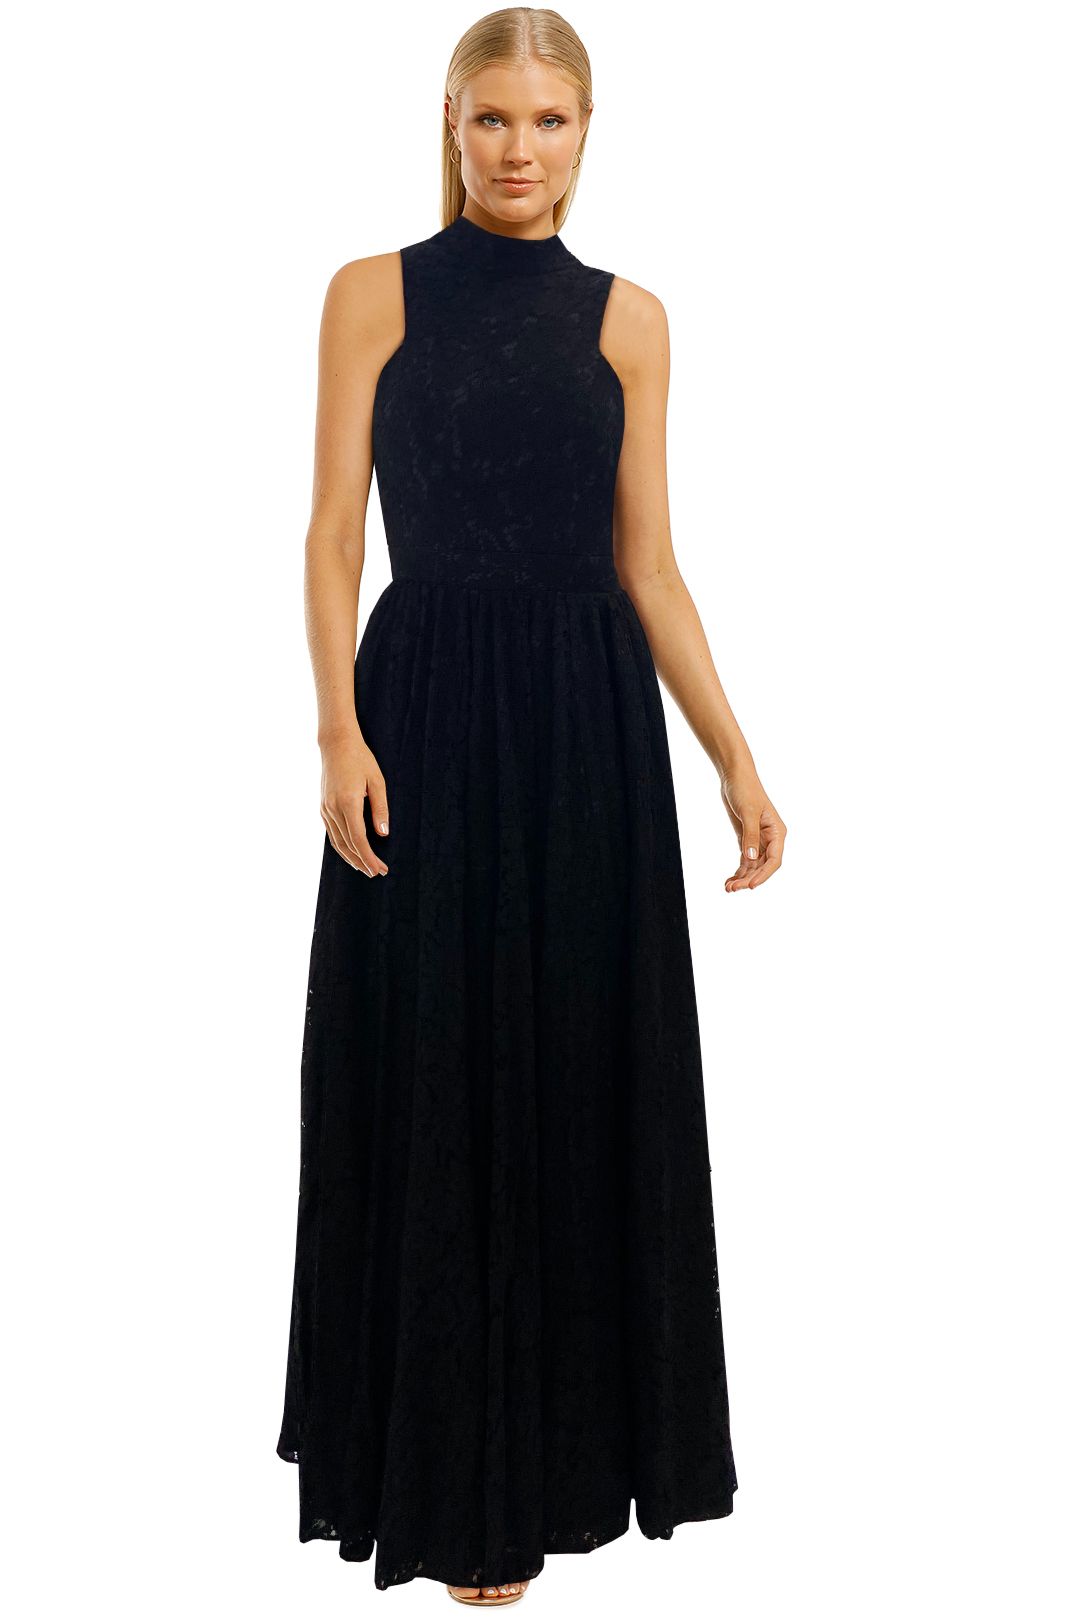 Fame-and-Partners-Tabitha-Dress-Black-Lace-Maxi-Dress-Front